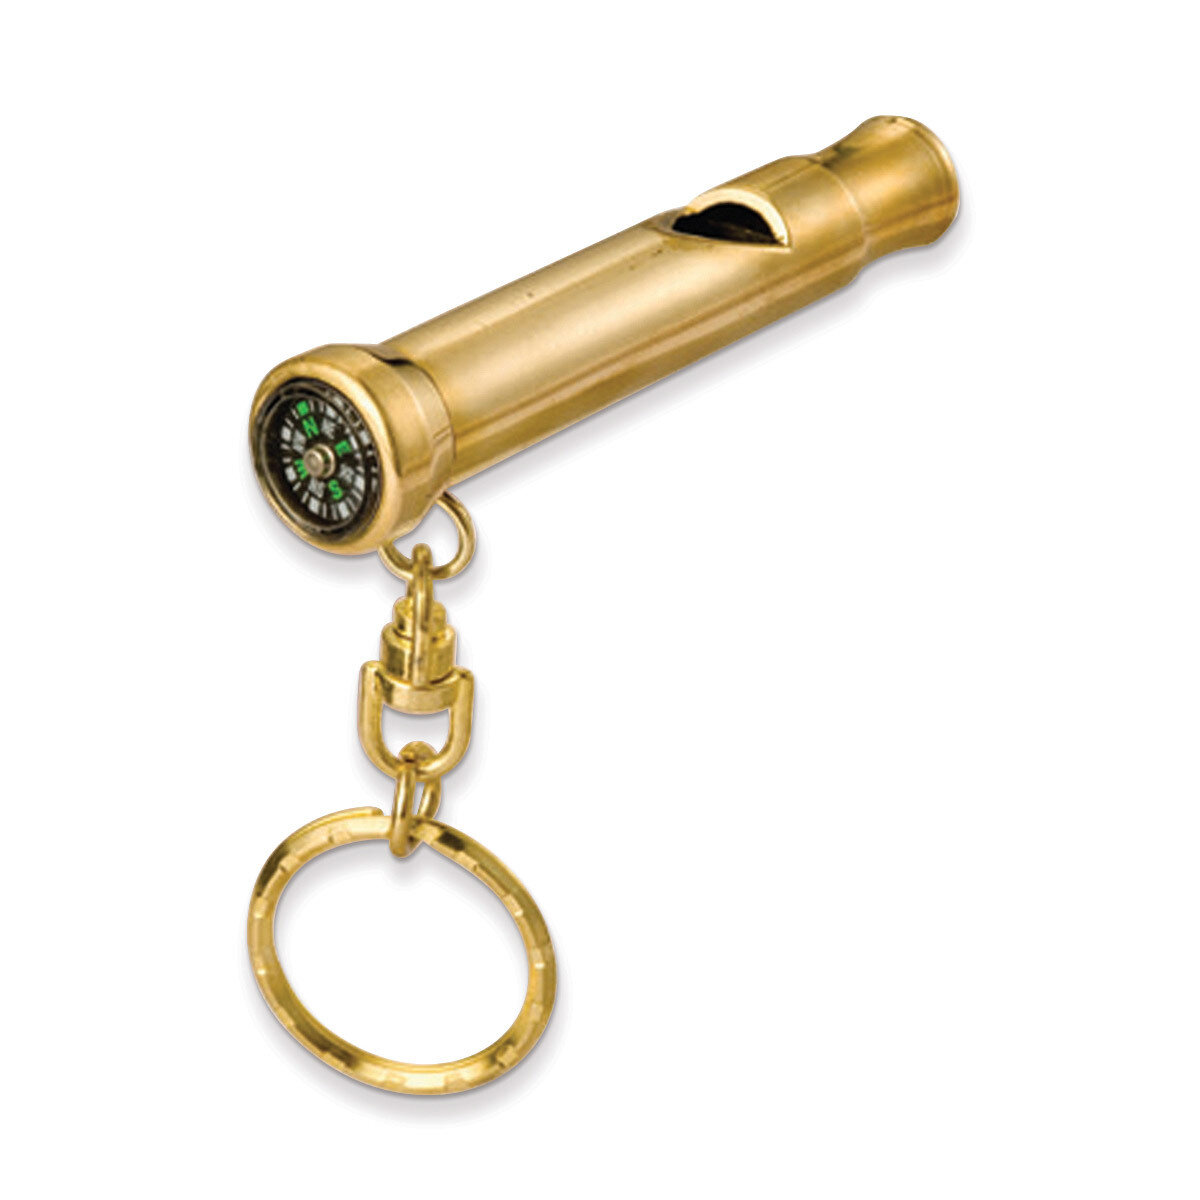 Brass Whistle with Compass Key Ring GM15607